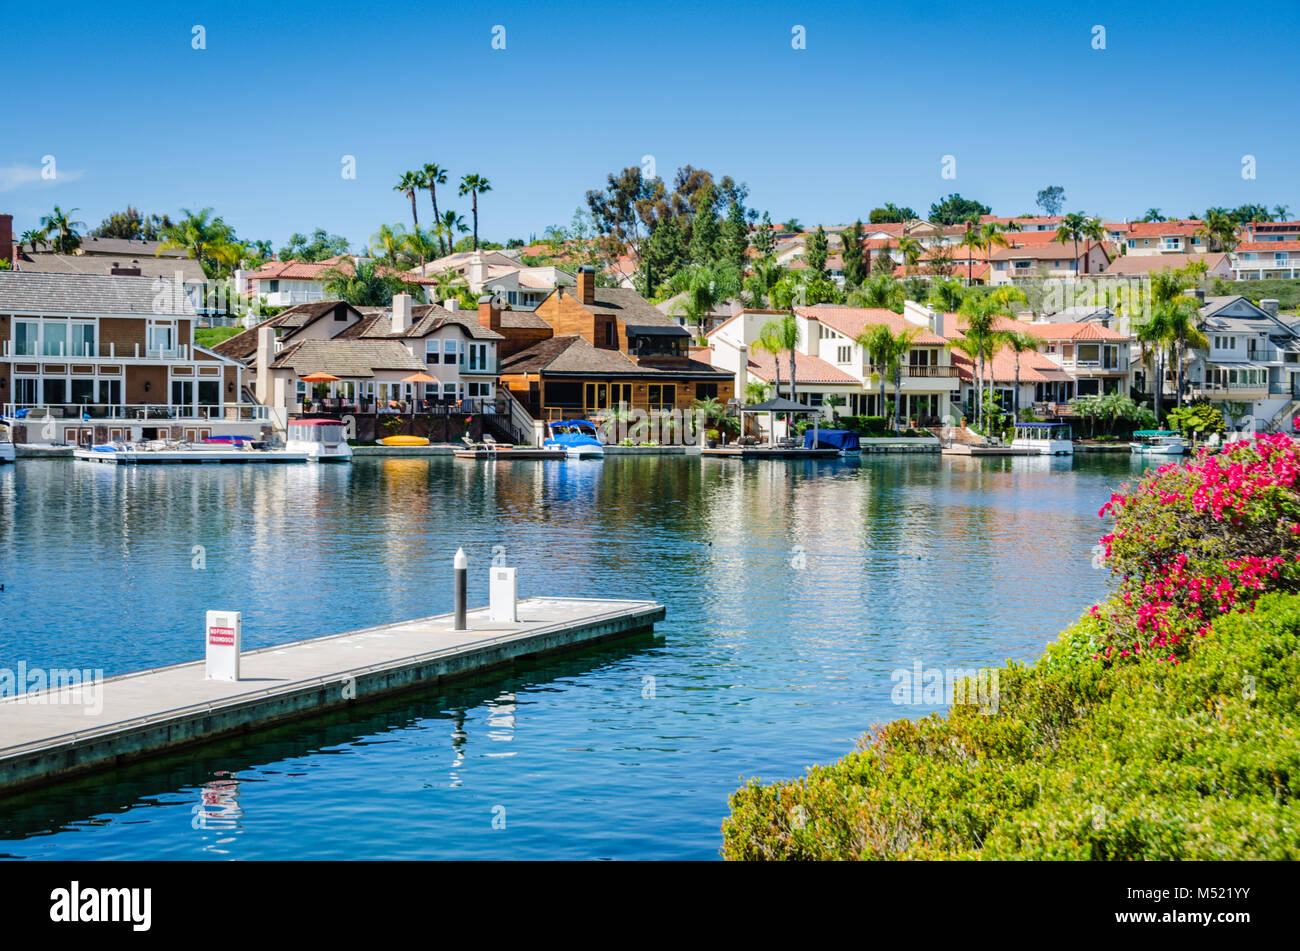 Lake Mission Viejo is a reservoir created for recreation in Mission Viejo, Orange County, California. The reservoir is formed by an earthfill dam acro Stock Photo